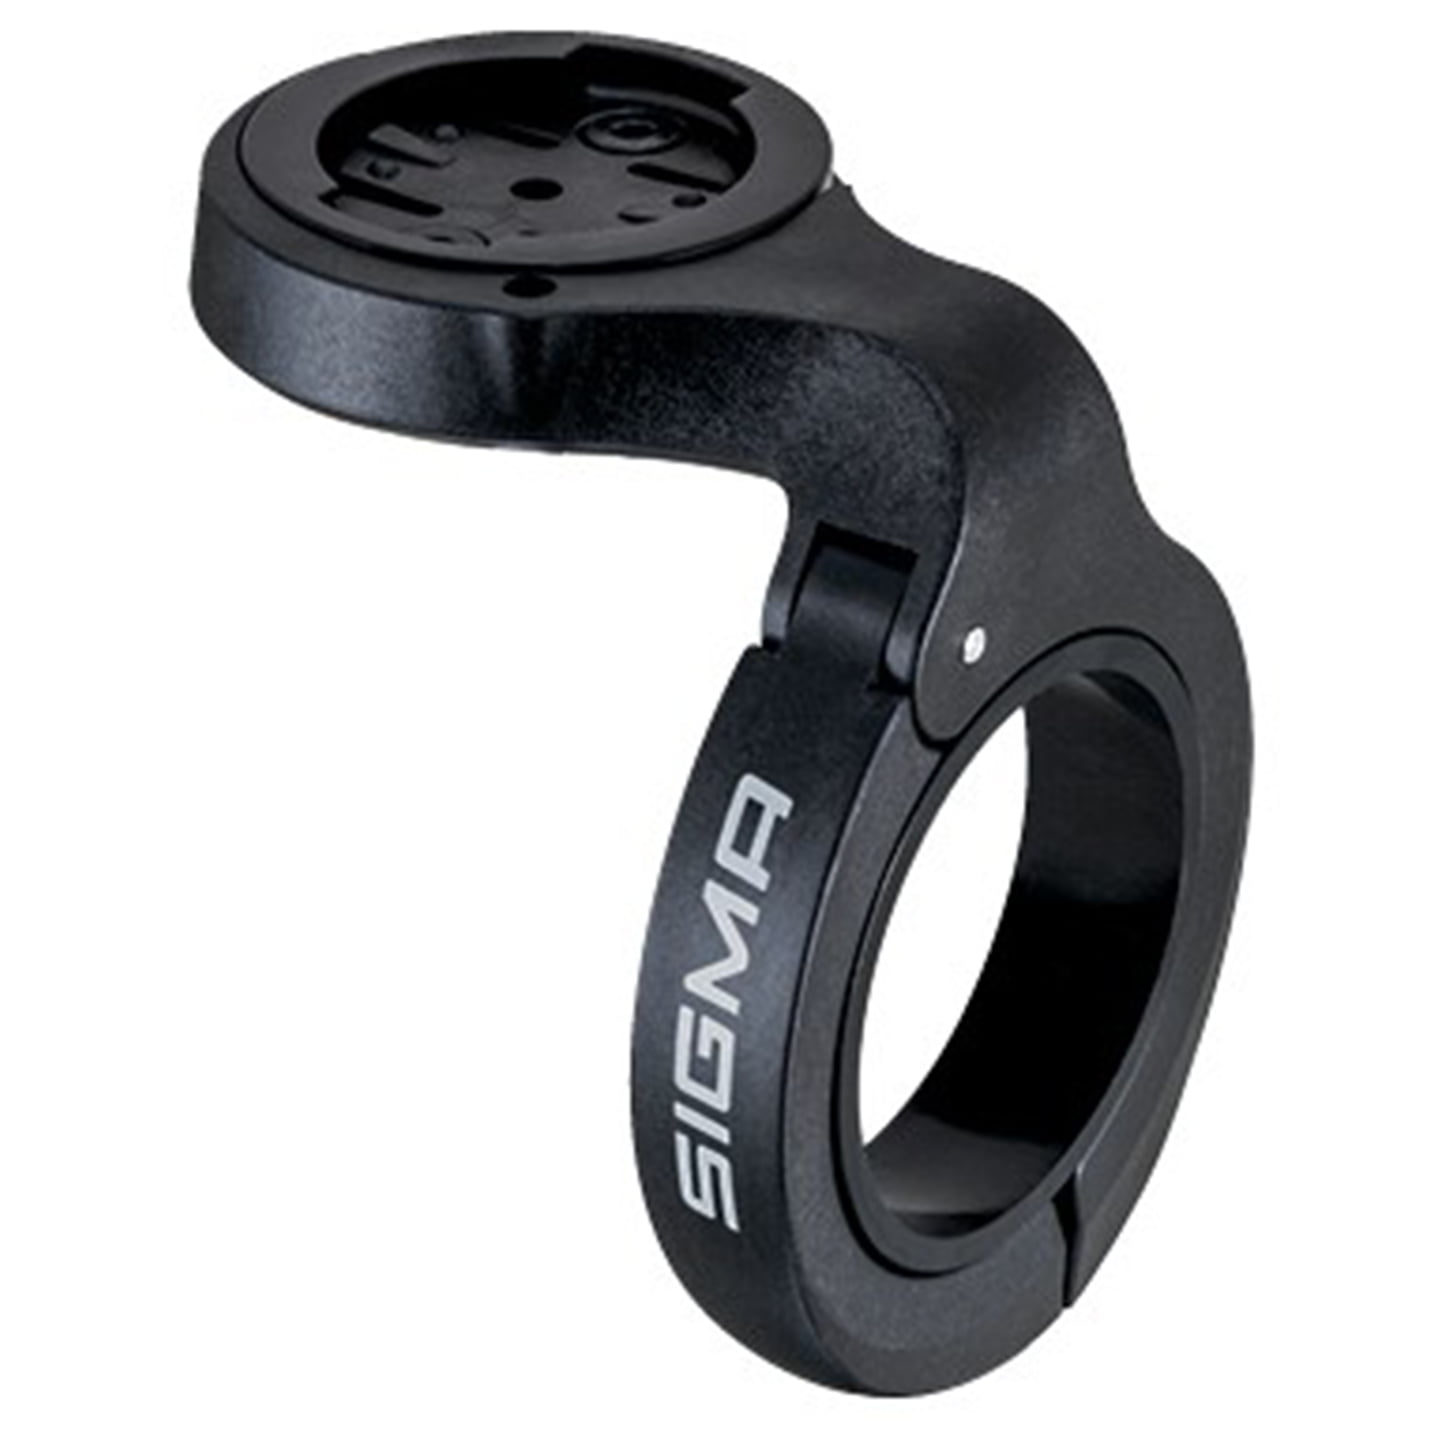 SIGMA Overclamp Butler GPS Mount Cycling Computer, Bike accessories